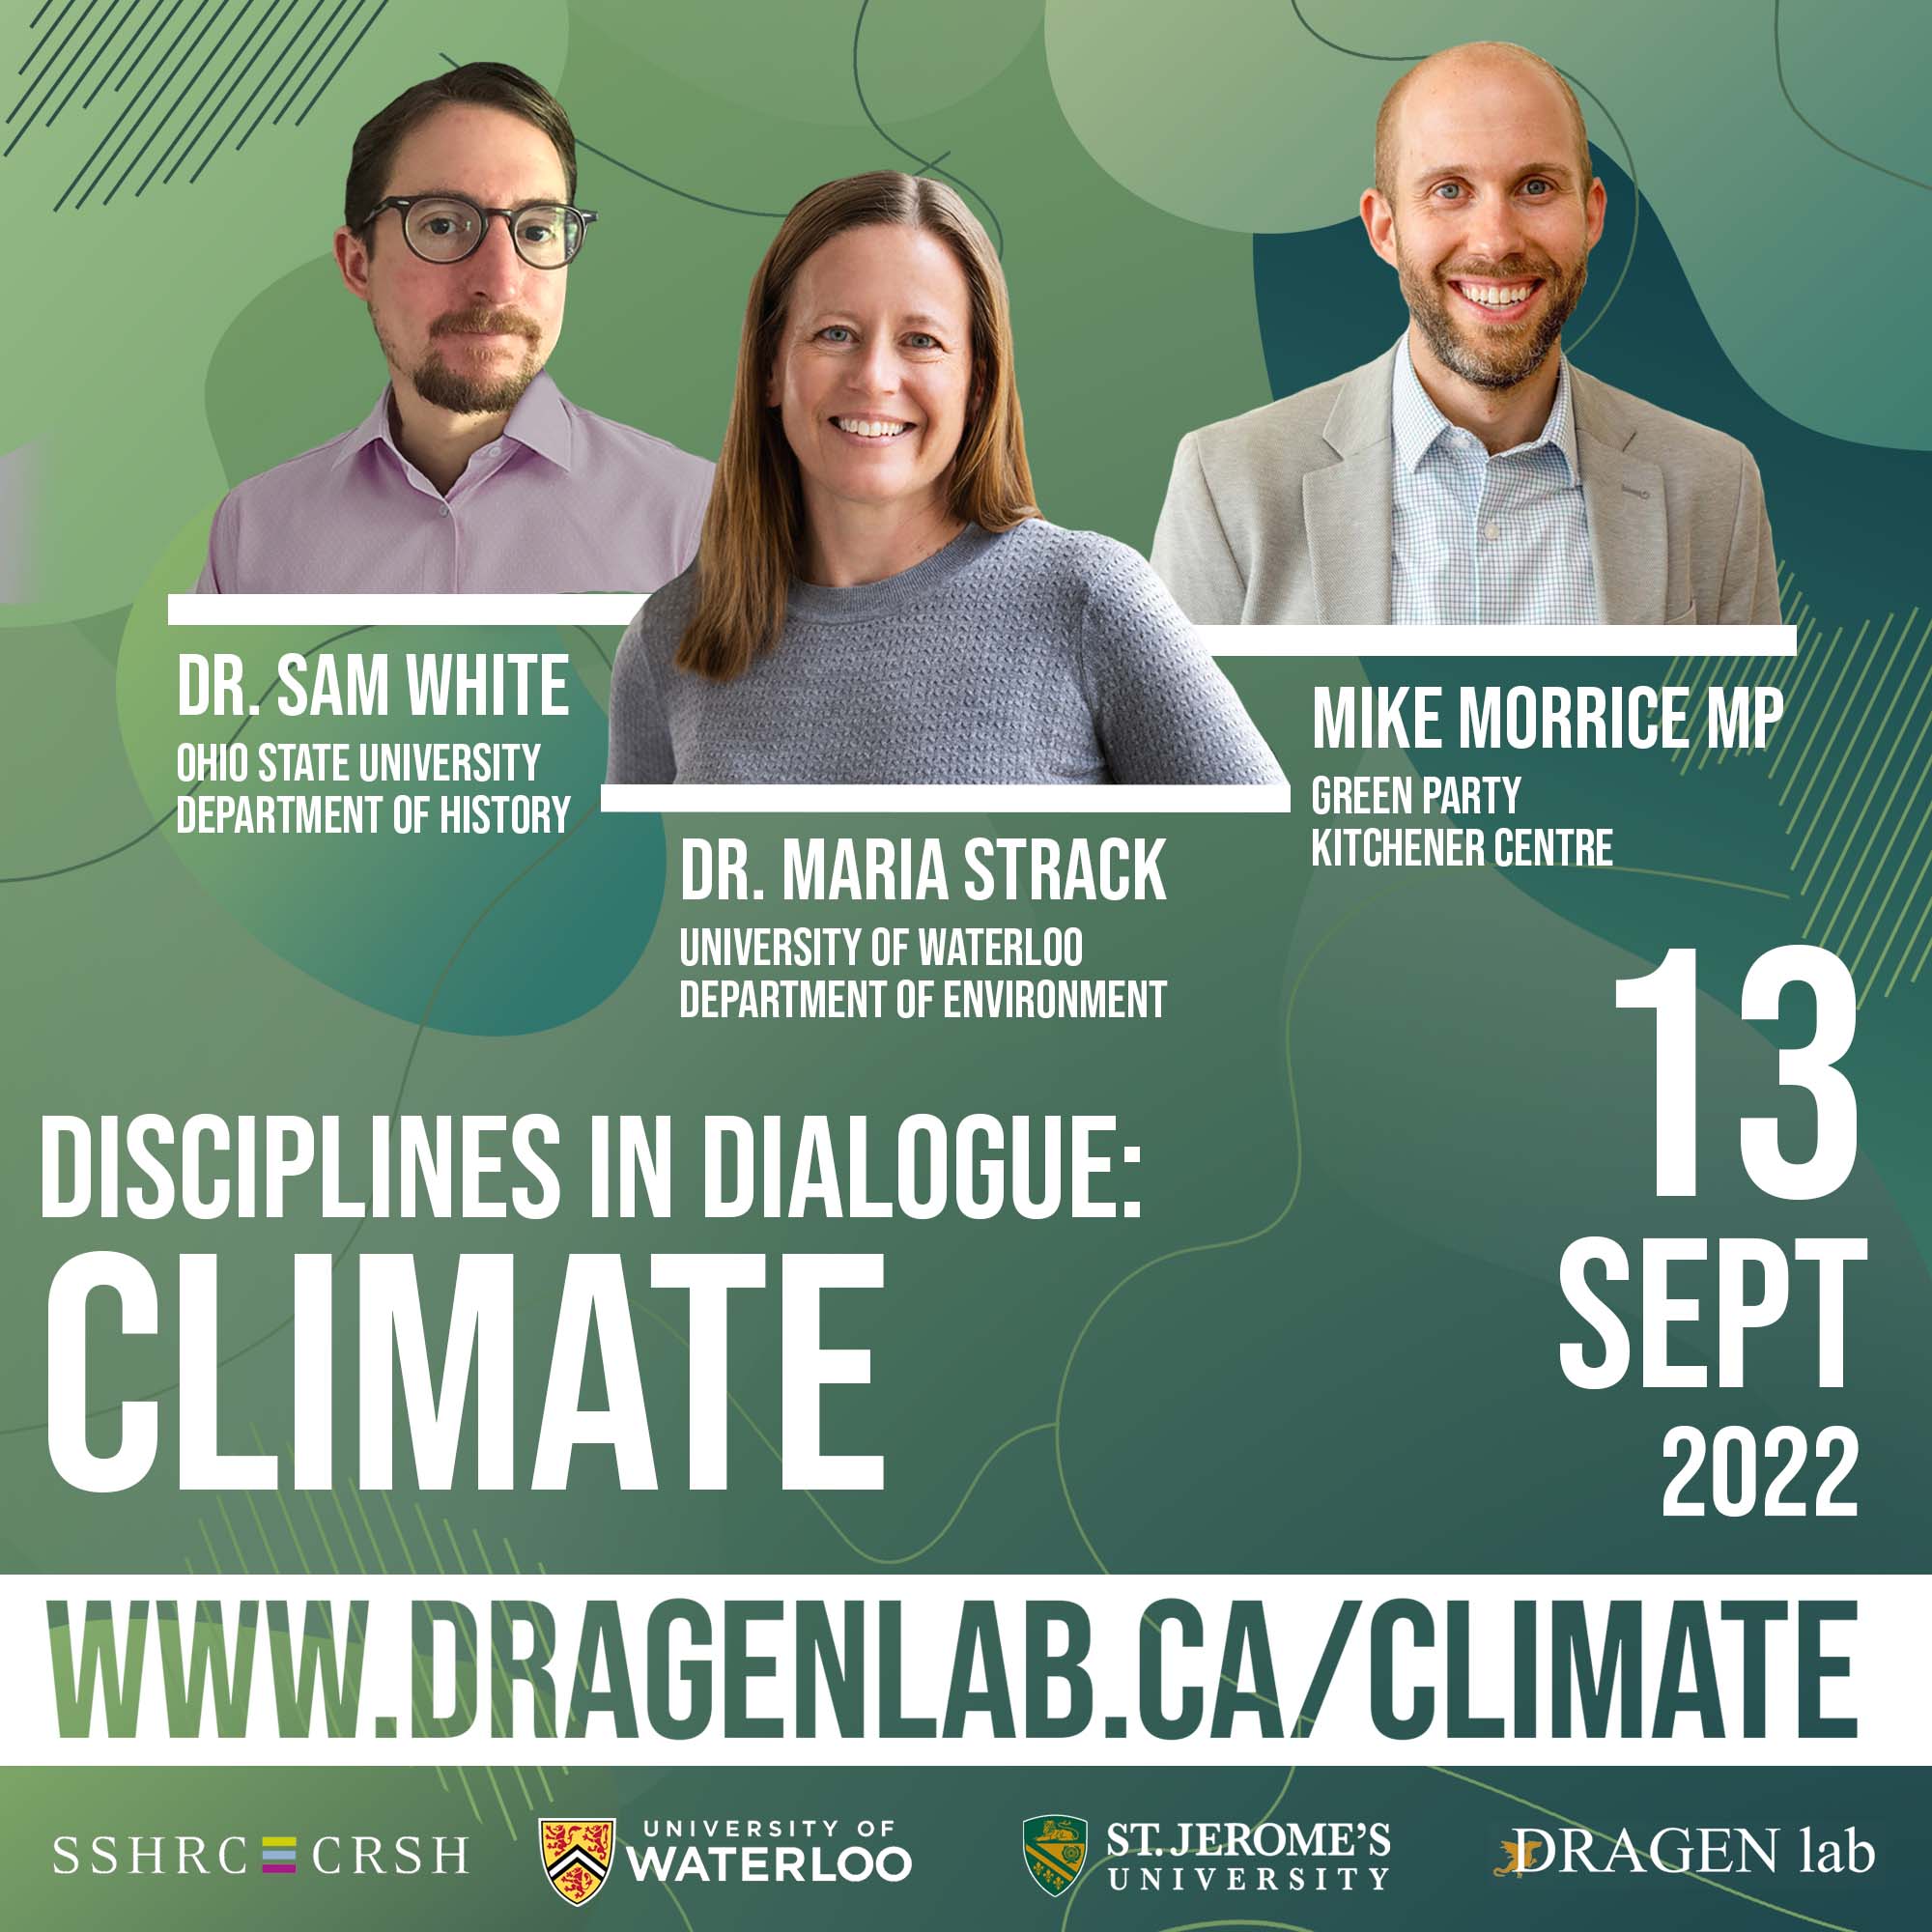 Disciplines in Dialogue Poster. Photos from left Dr. Sam White, Ohio State University Department of History, Center: Dr. Maria Strack, University of Waterloo, Department of Environment; Left: Mike Morrice, Green Party, Kitchener Centre. Date: 13 September 2022. www. dragenlab.ca/climate. Sponsors: SSHRC; University of Waterloo, St. Jerome's University, DRAGEN lab